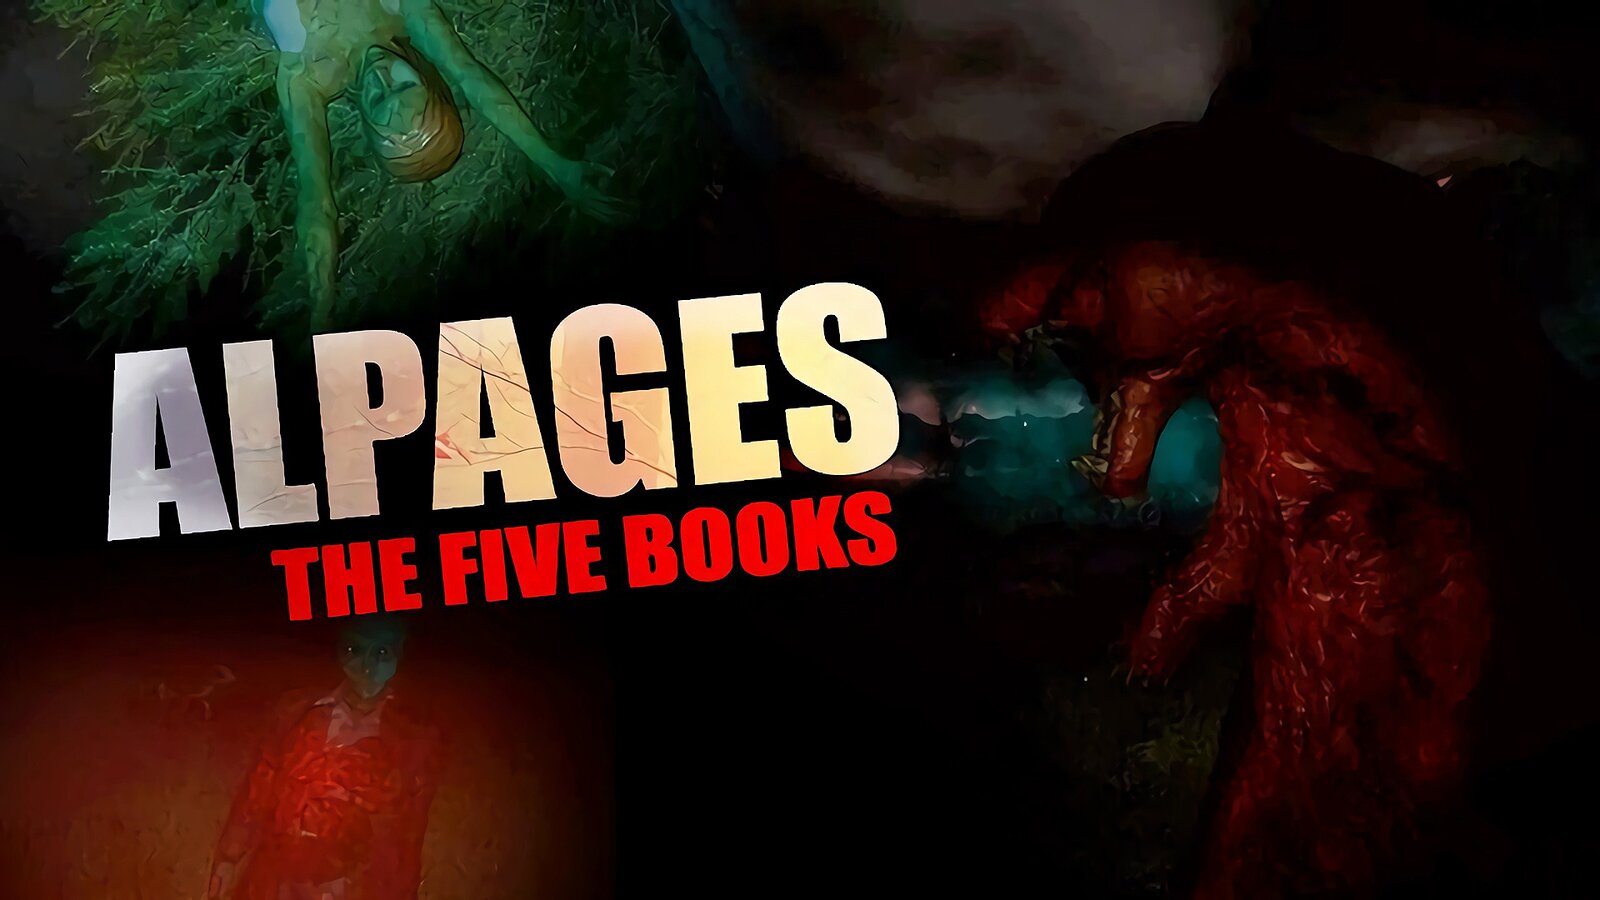 ALPAGES : THE FIVE BOOKS